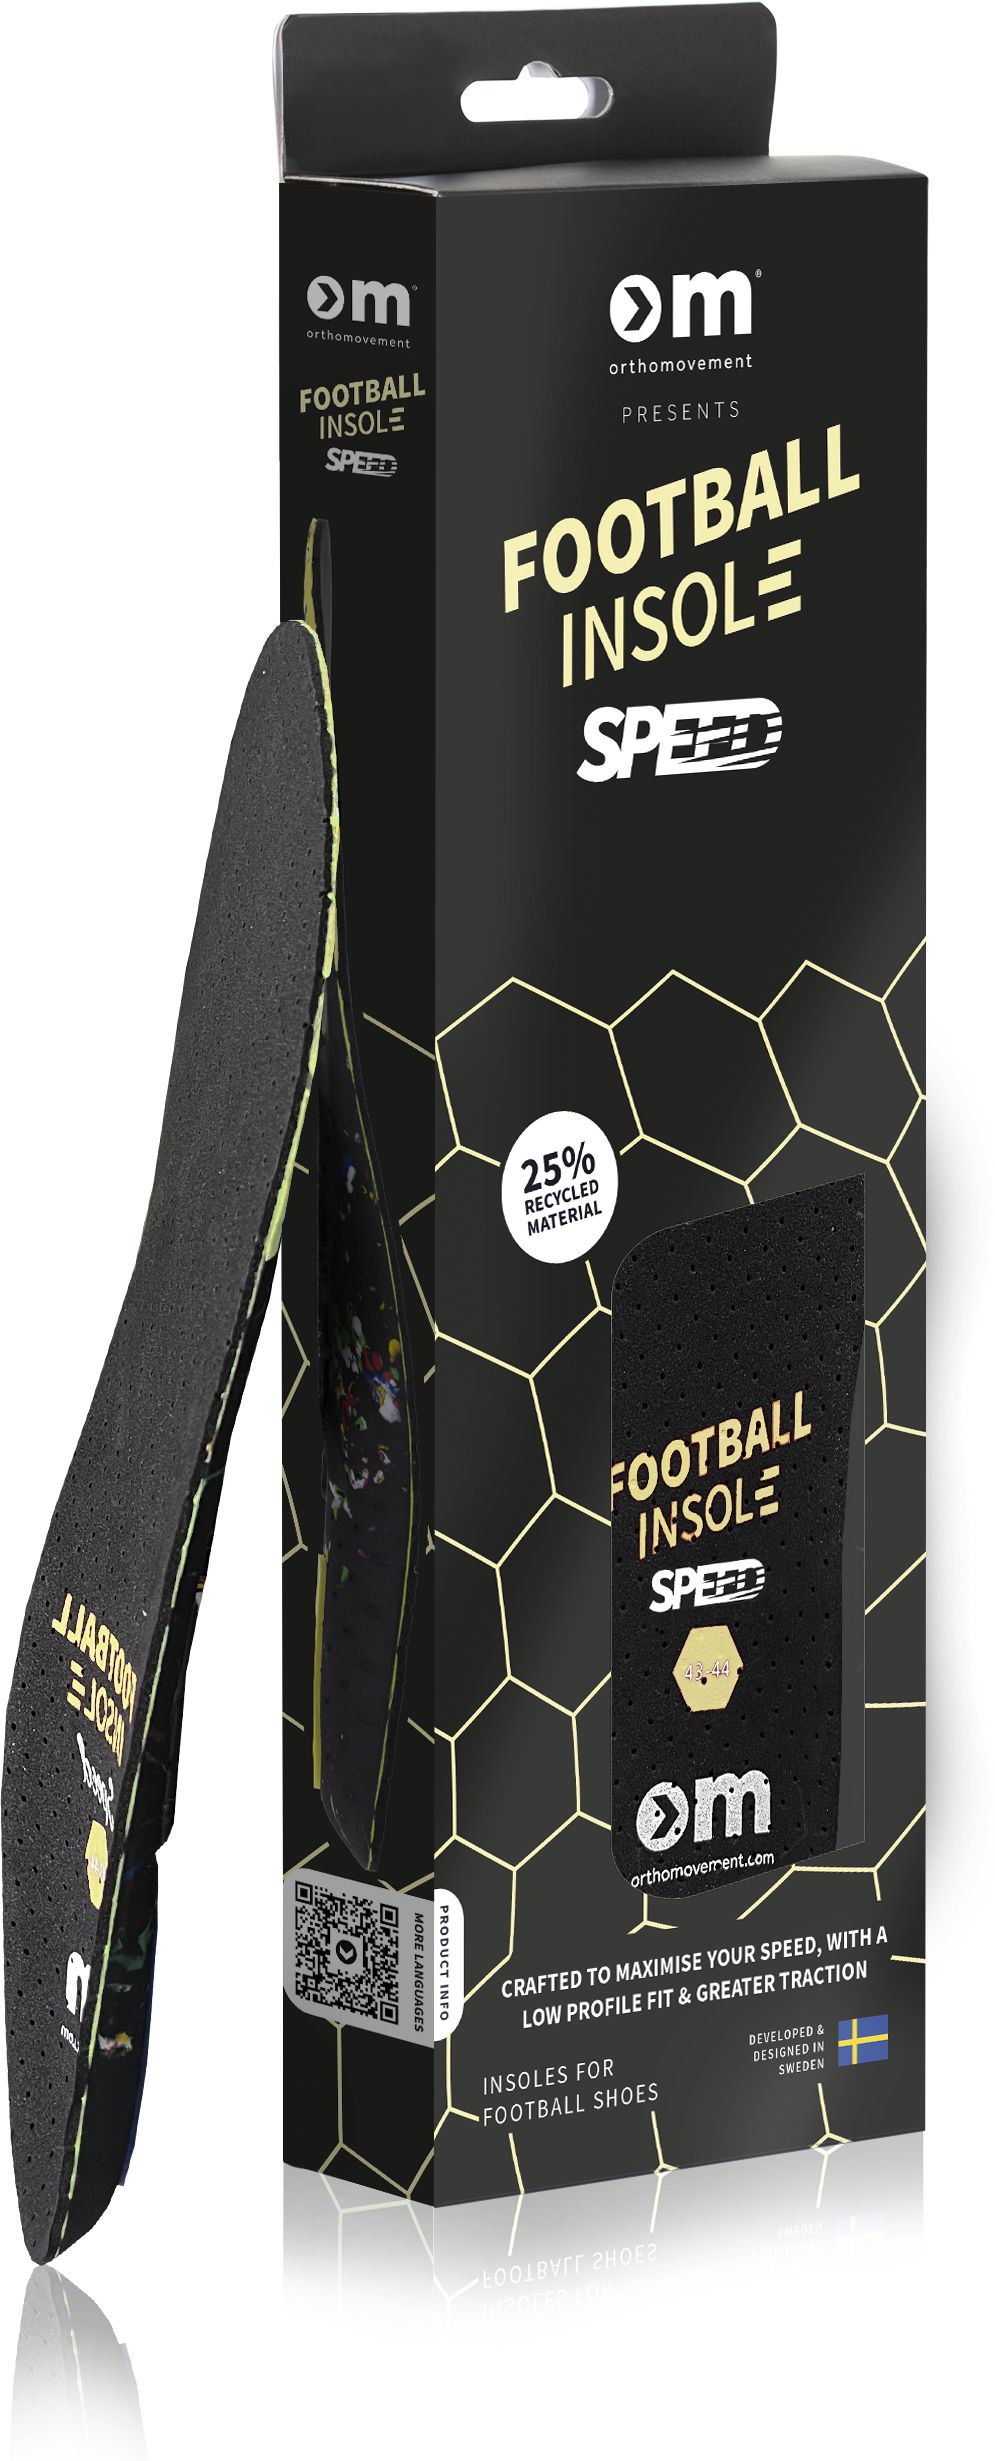 ORTHO MOVEMENT, FOOTBALL INSOLE SPEED